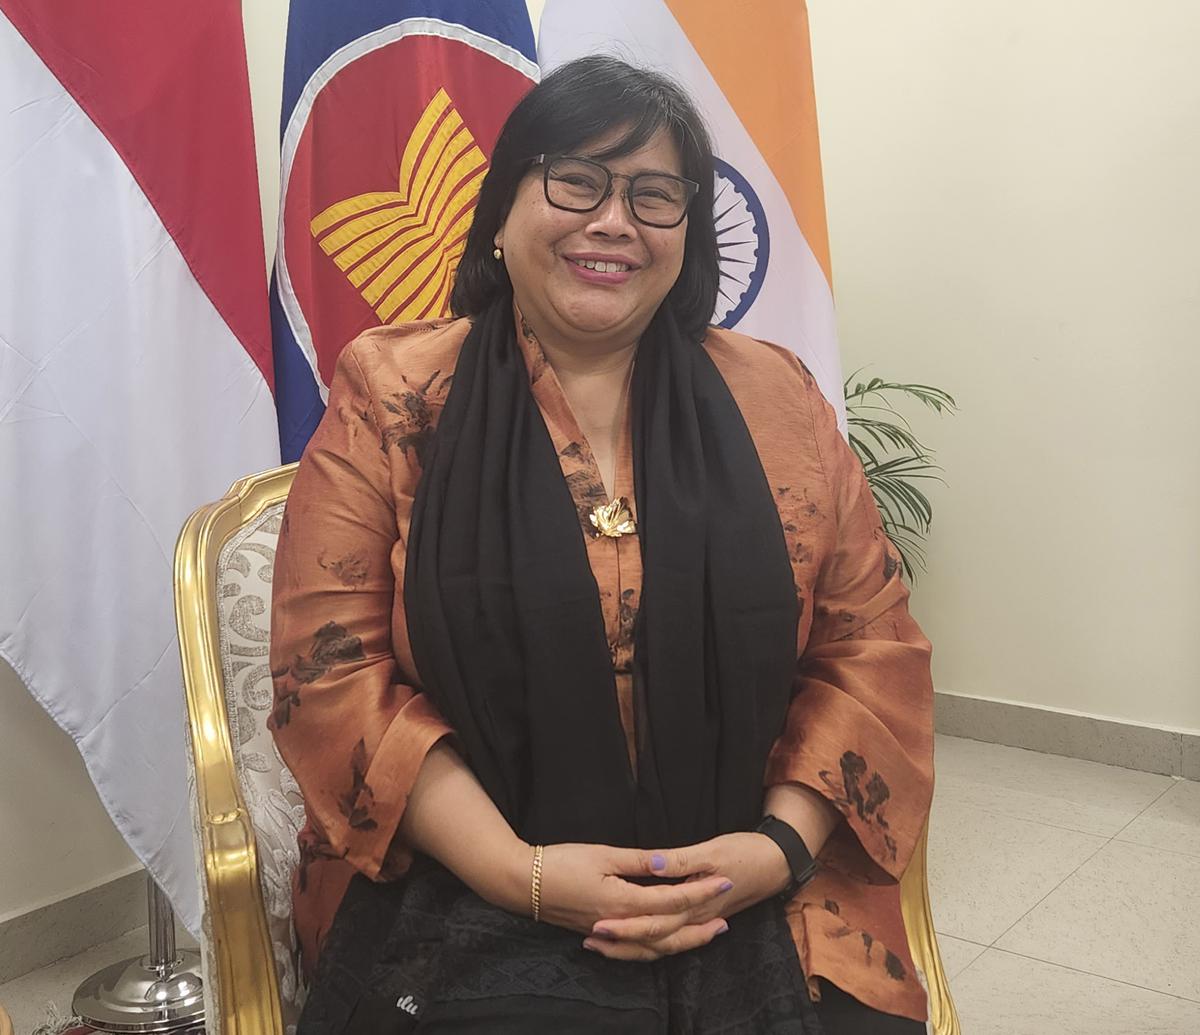 Want all leaders to meet at G-20, resolve issues: Indonesian Envoy